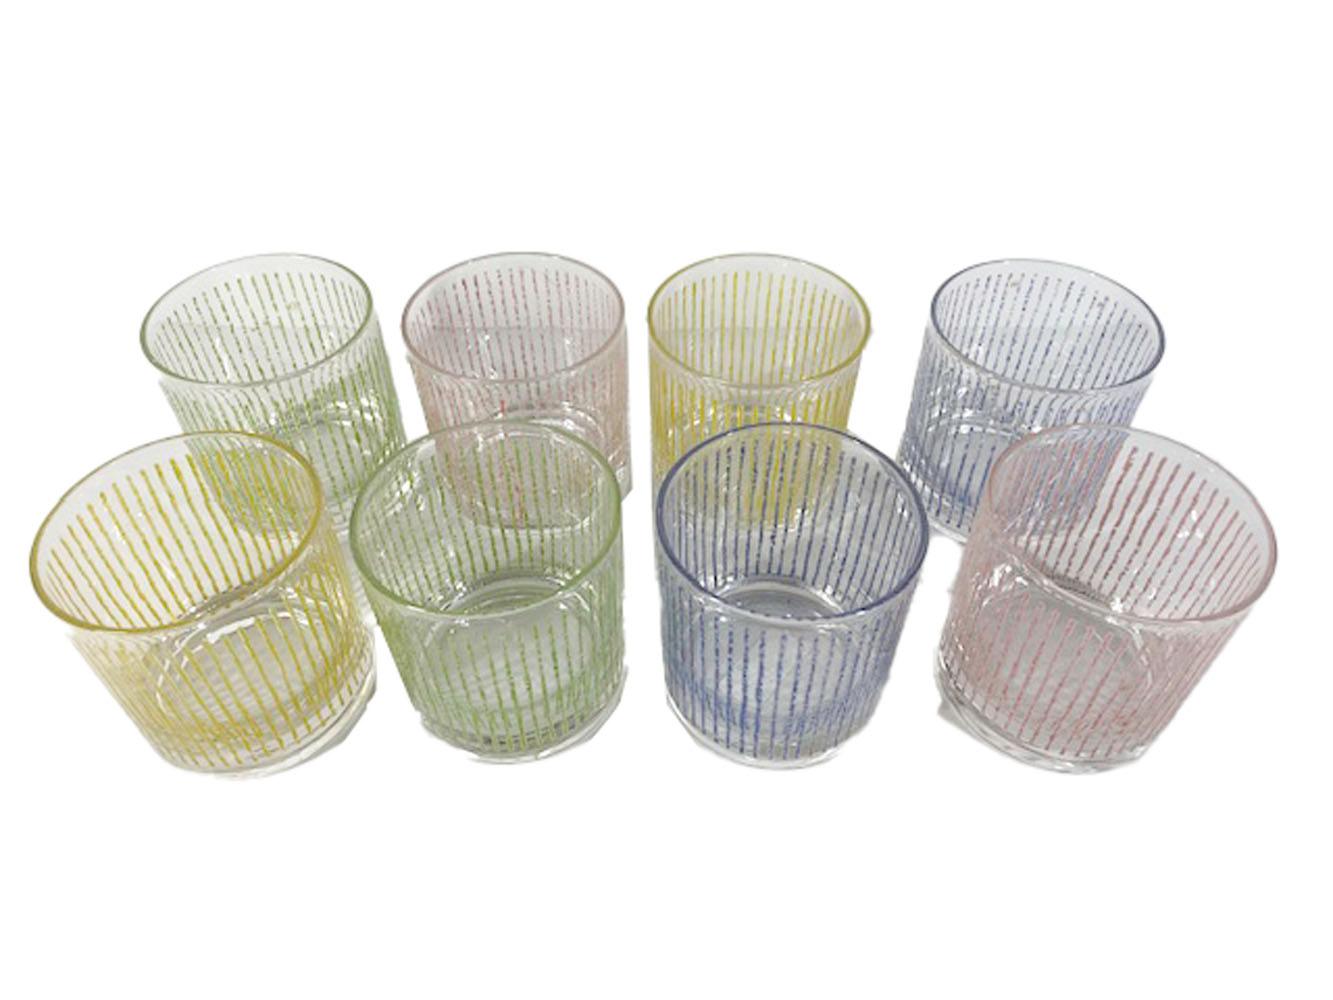 Eight mid-century modern rocks glasses by Federal Glass Co / two each of four colors having raised translucent vertical lines in red, green, yellow and blue.